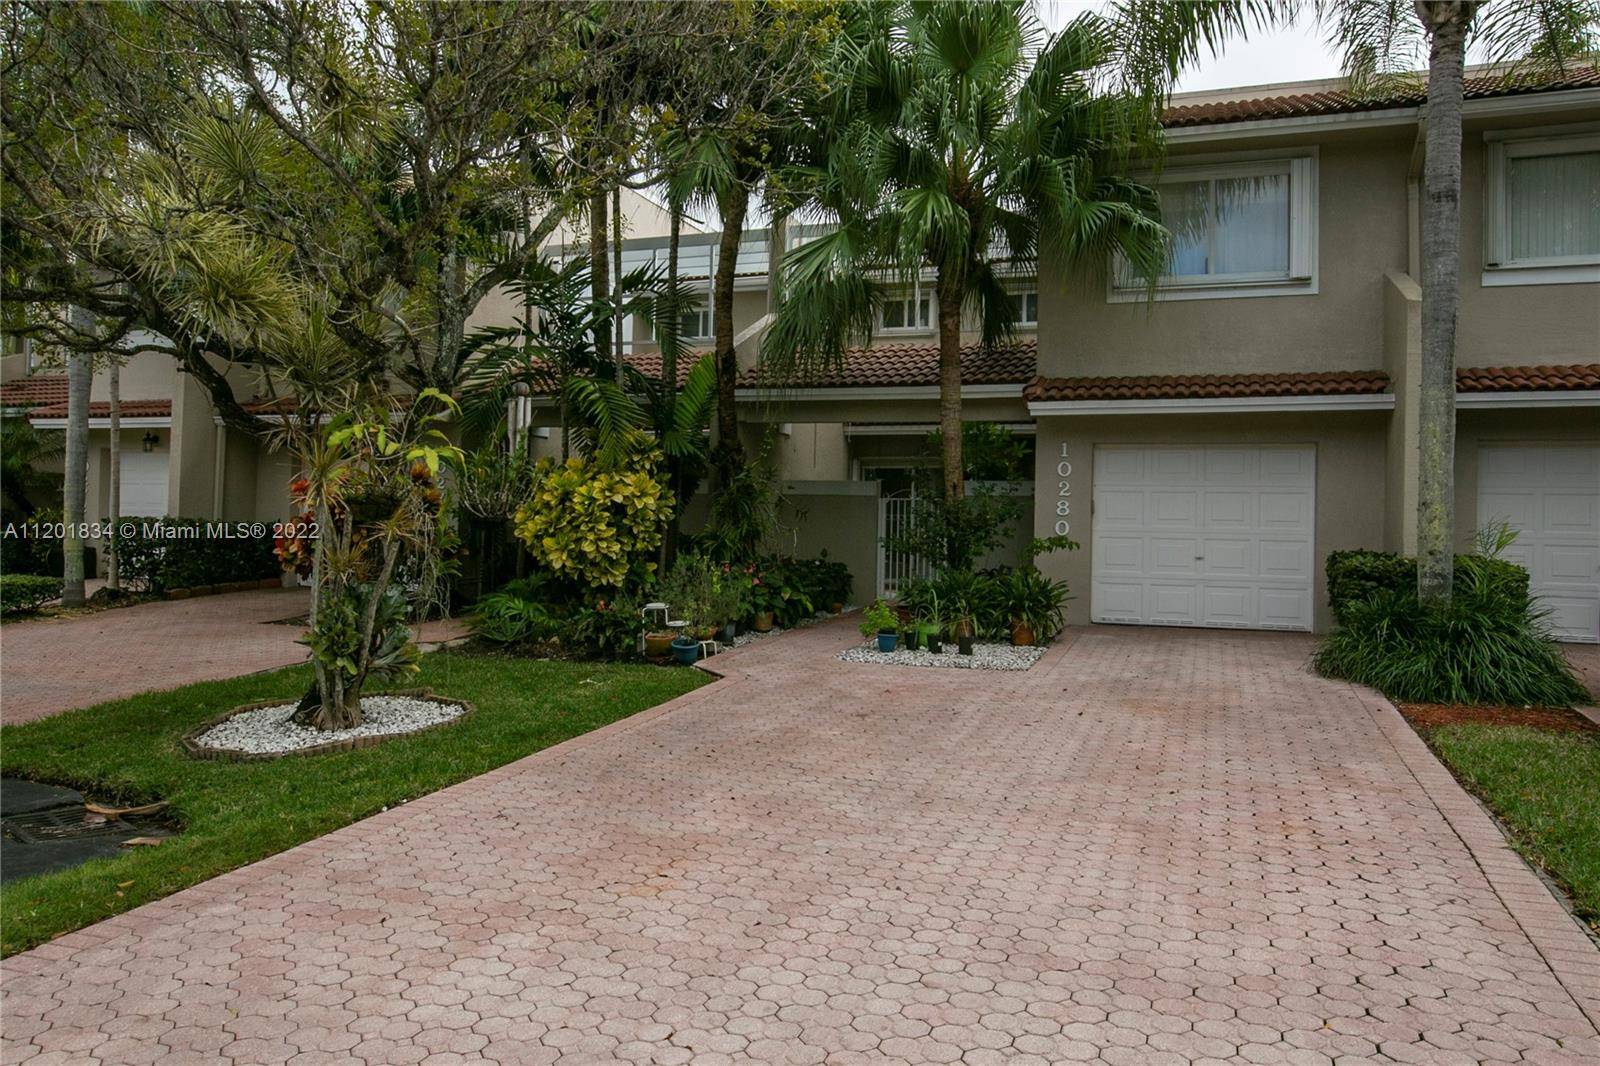 Gated community townhouse in the heart of Doral Park.